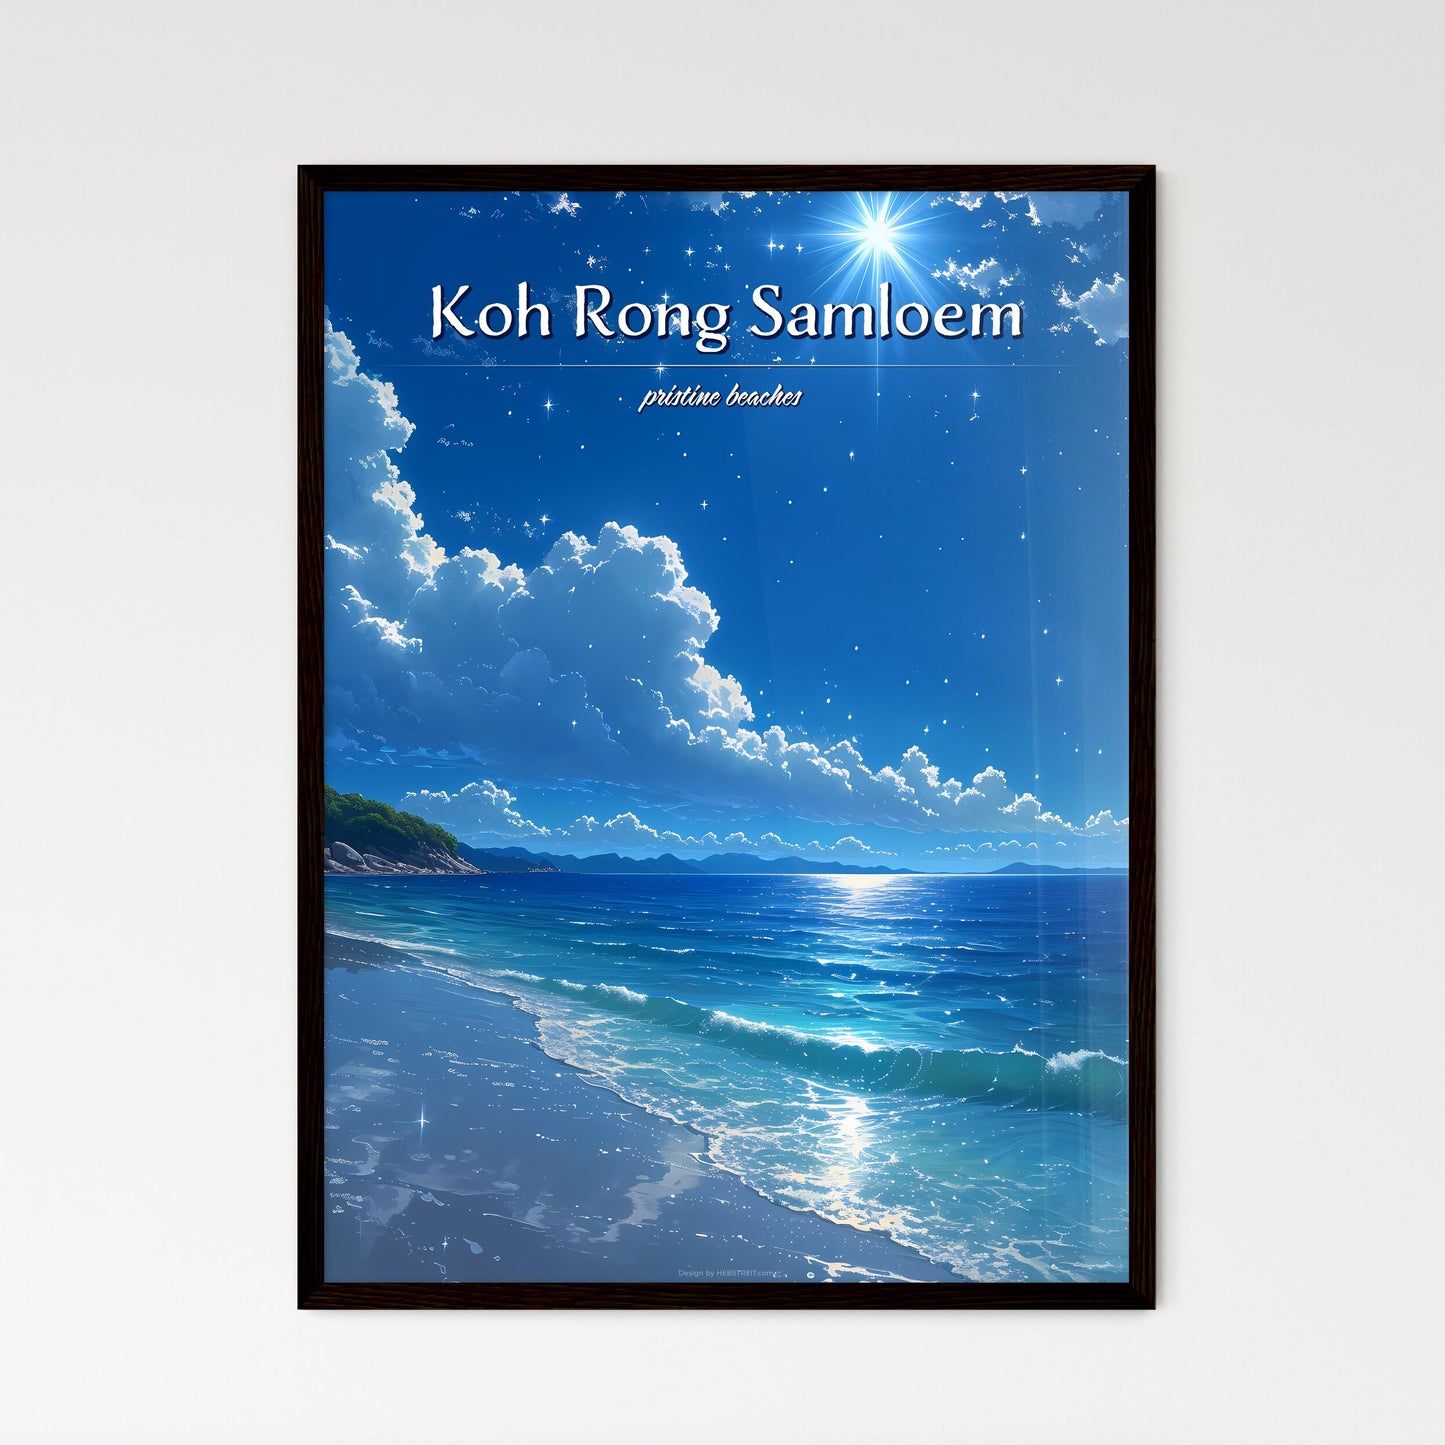 Koh Rong Samloem Beach - Art print of a beach with a sandy beach and blue sky with clouds Default Title